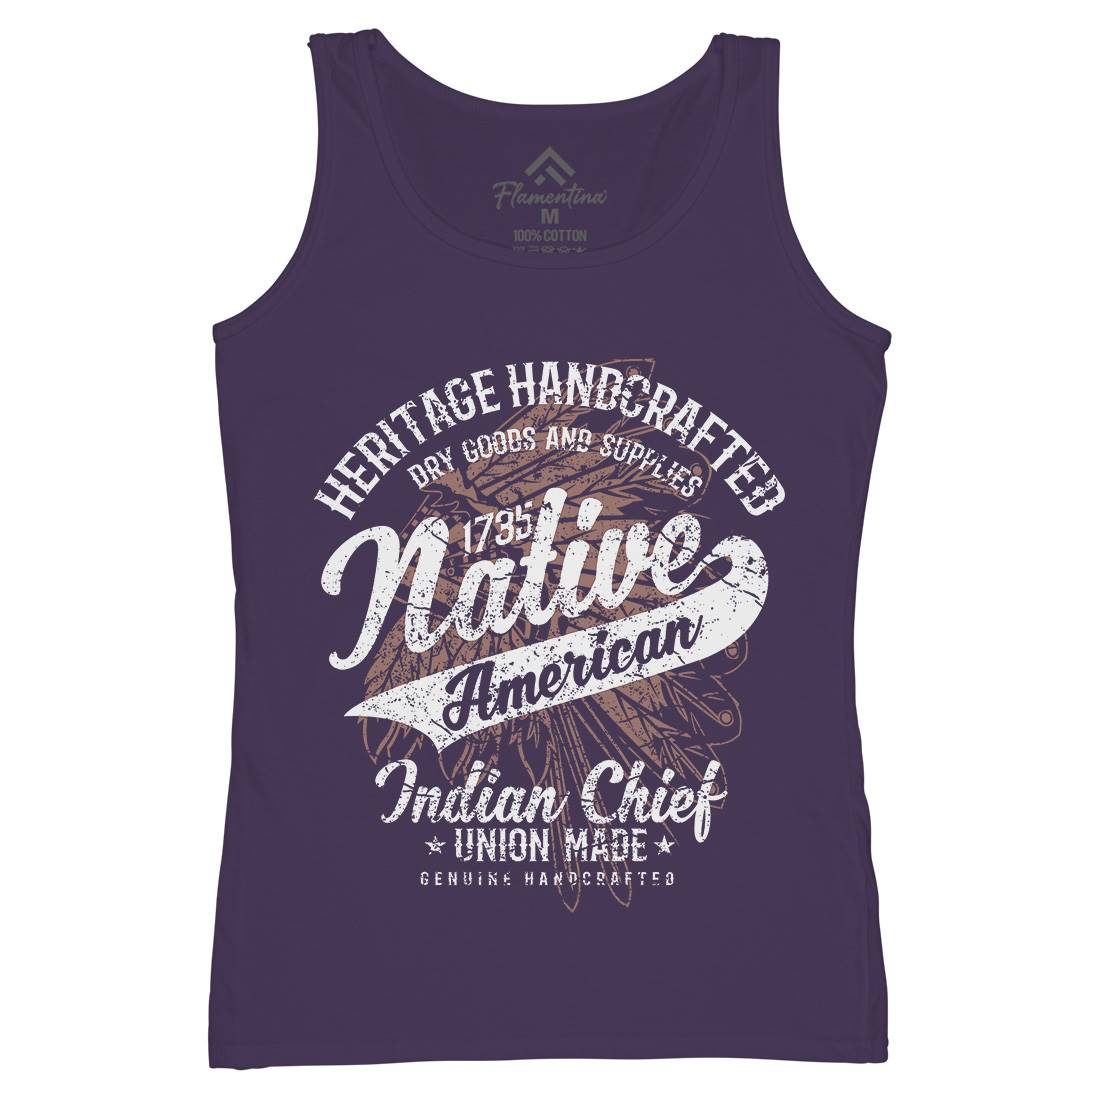 Native American Womens Organic Tank Top Vest Motorcycles A094